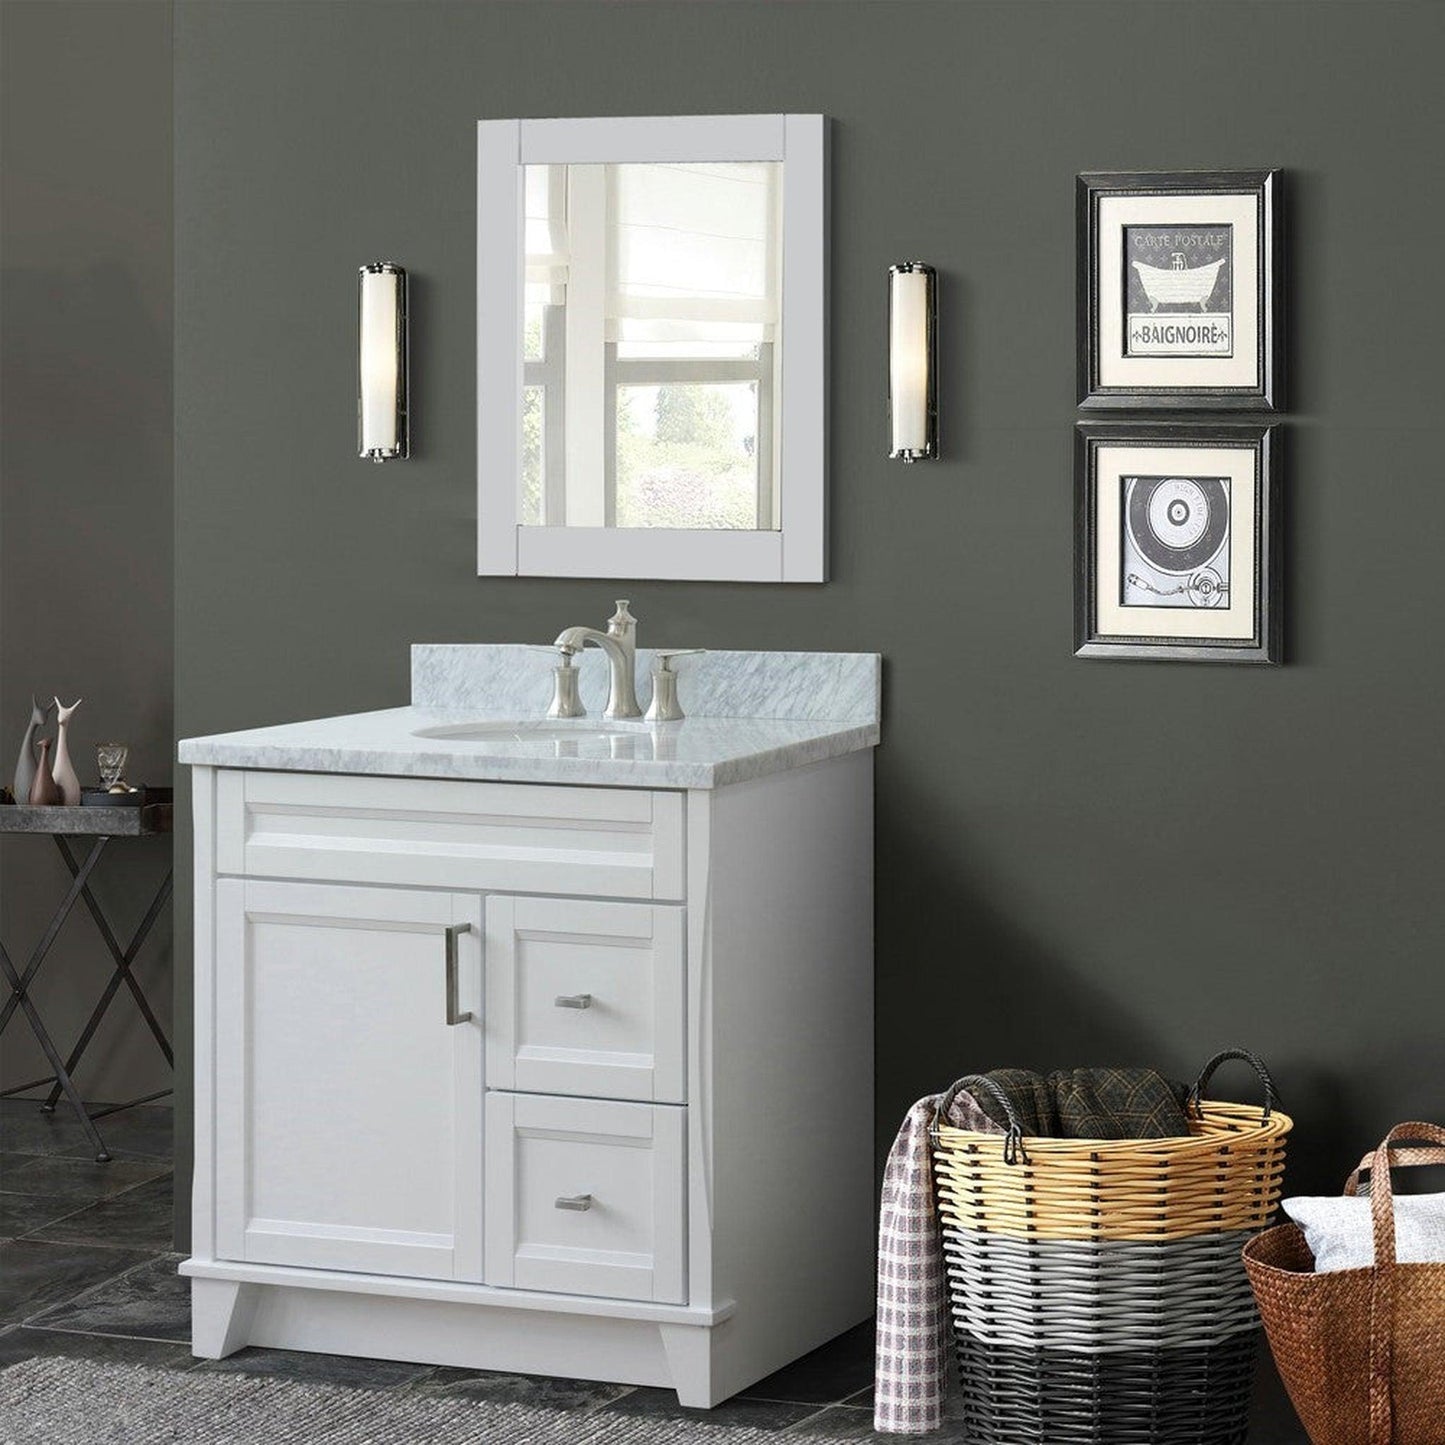 Bellaterra Home Terni 37" 1-Door 2-Drawer White Freestanding Vanity Set With Ceramic Center Undermount Oval Sink and White Carrara Marble Top, and Left Door Base